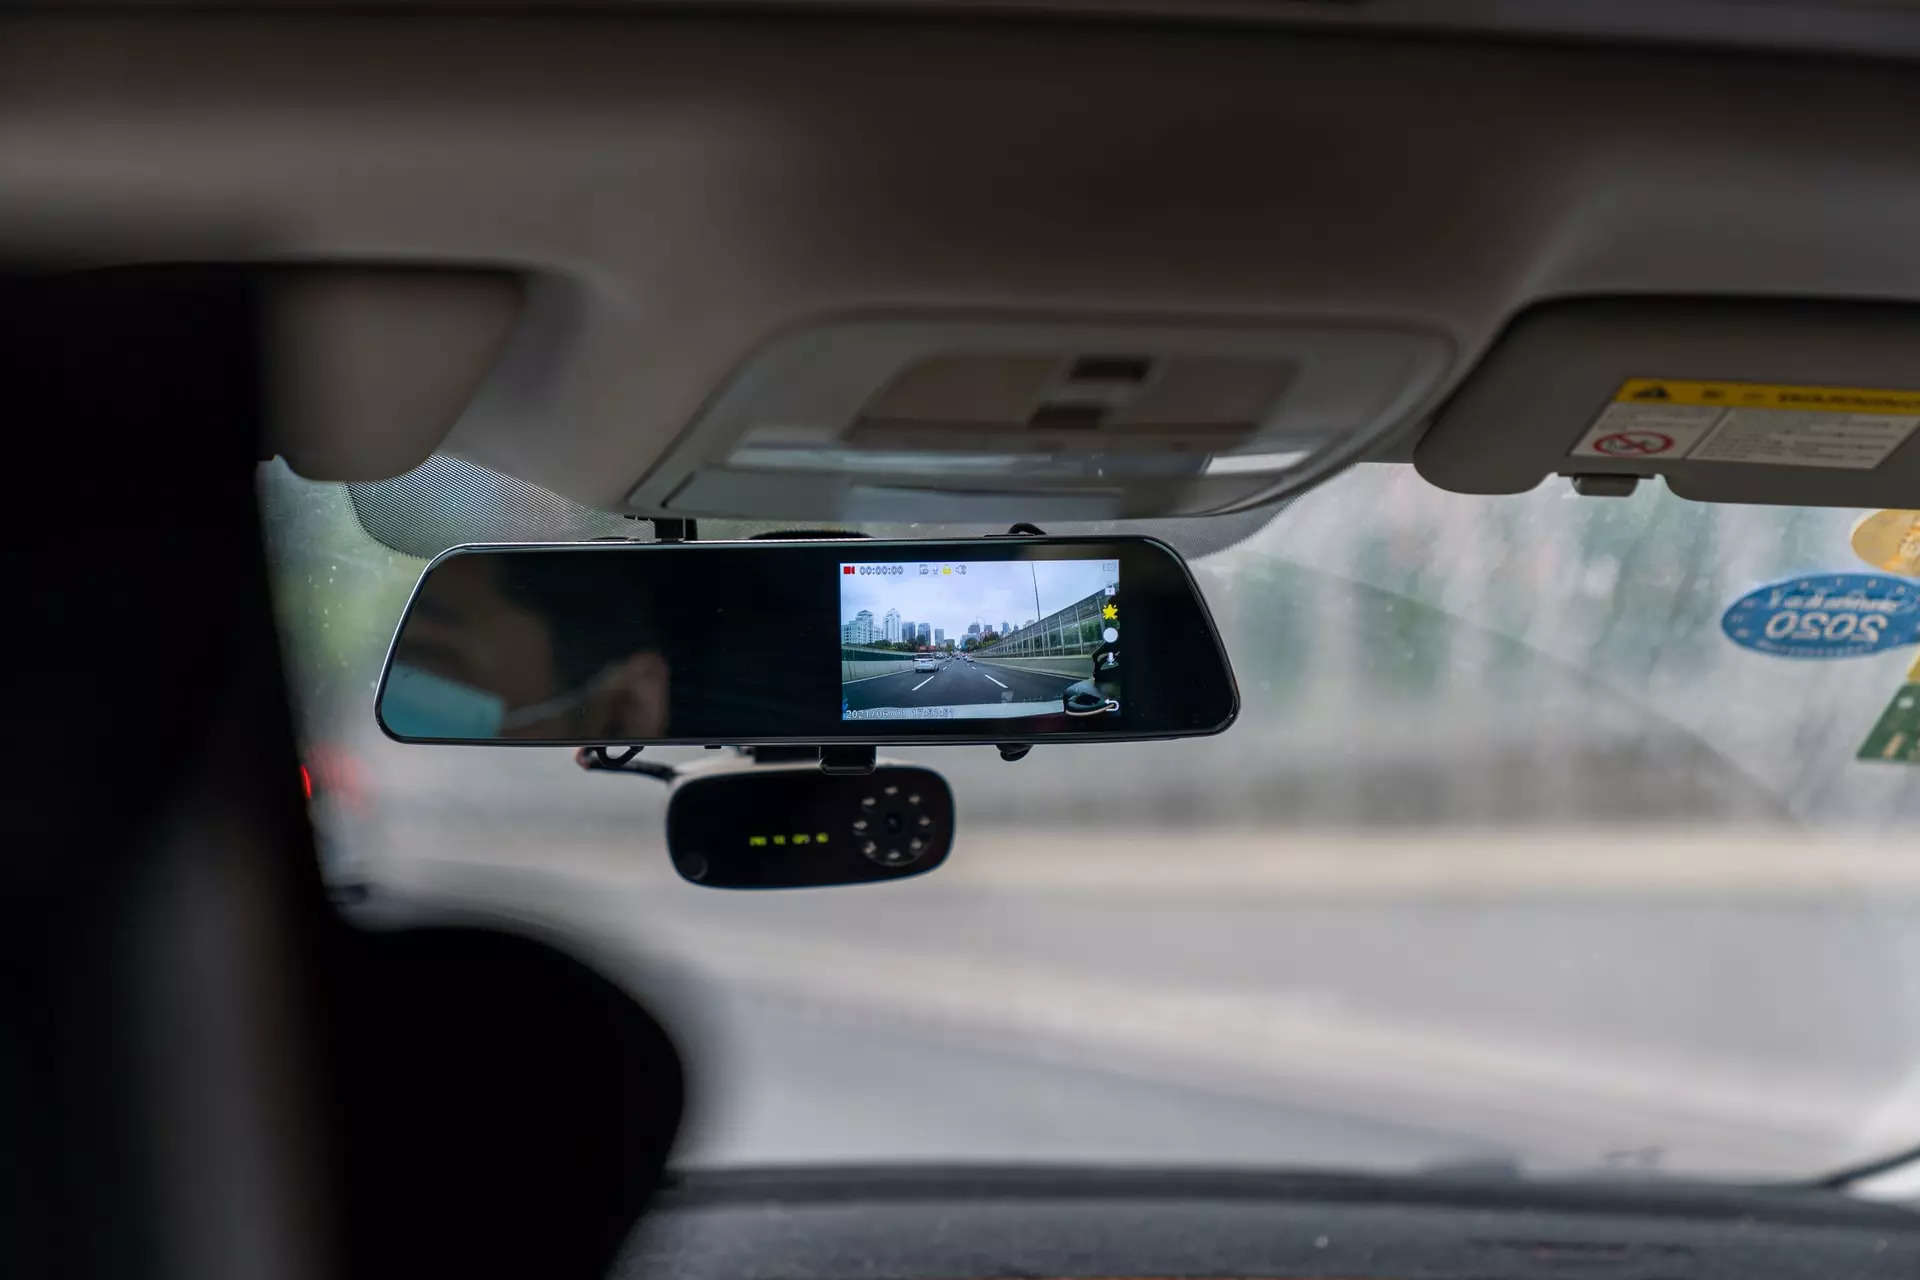 https://www.businessinsider.in/photo/88087971/best-dashboard-cameras-with-wi-fi-support-for-cars.jpg?imgsize=45604